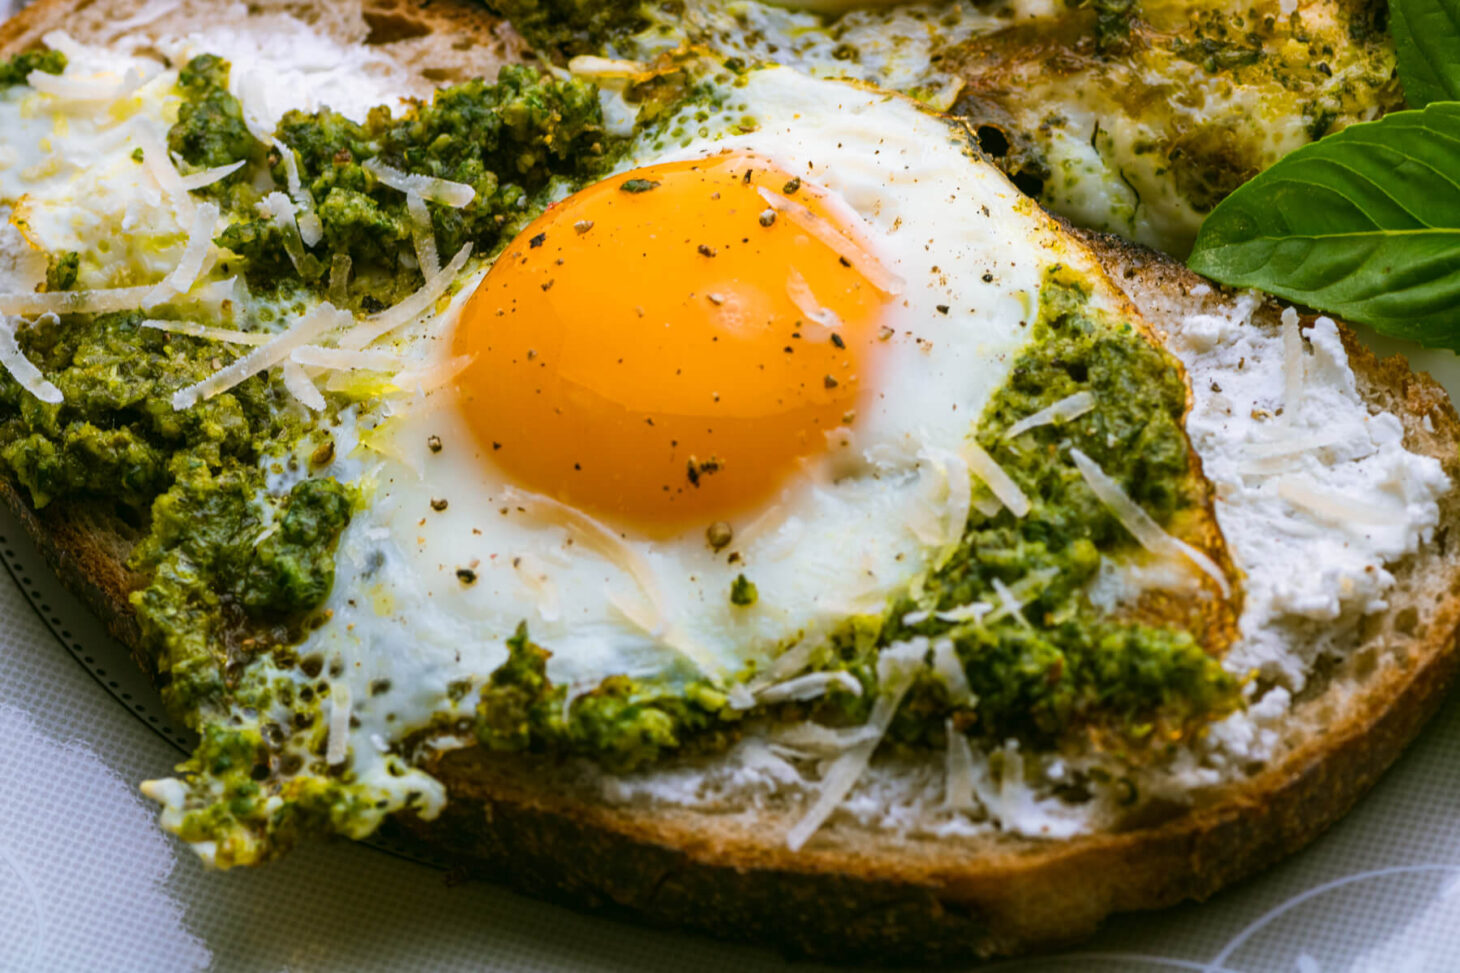 A fried Pesto Egg on toast with sunny side up yellow egg yolk and vibrant green basil pesto.